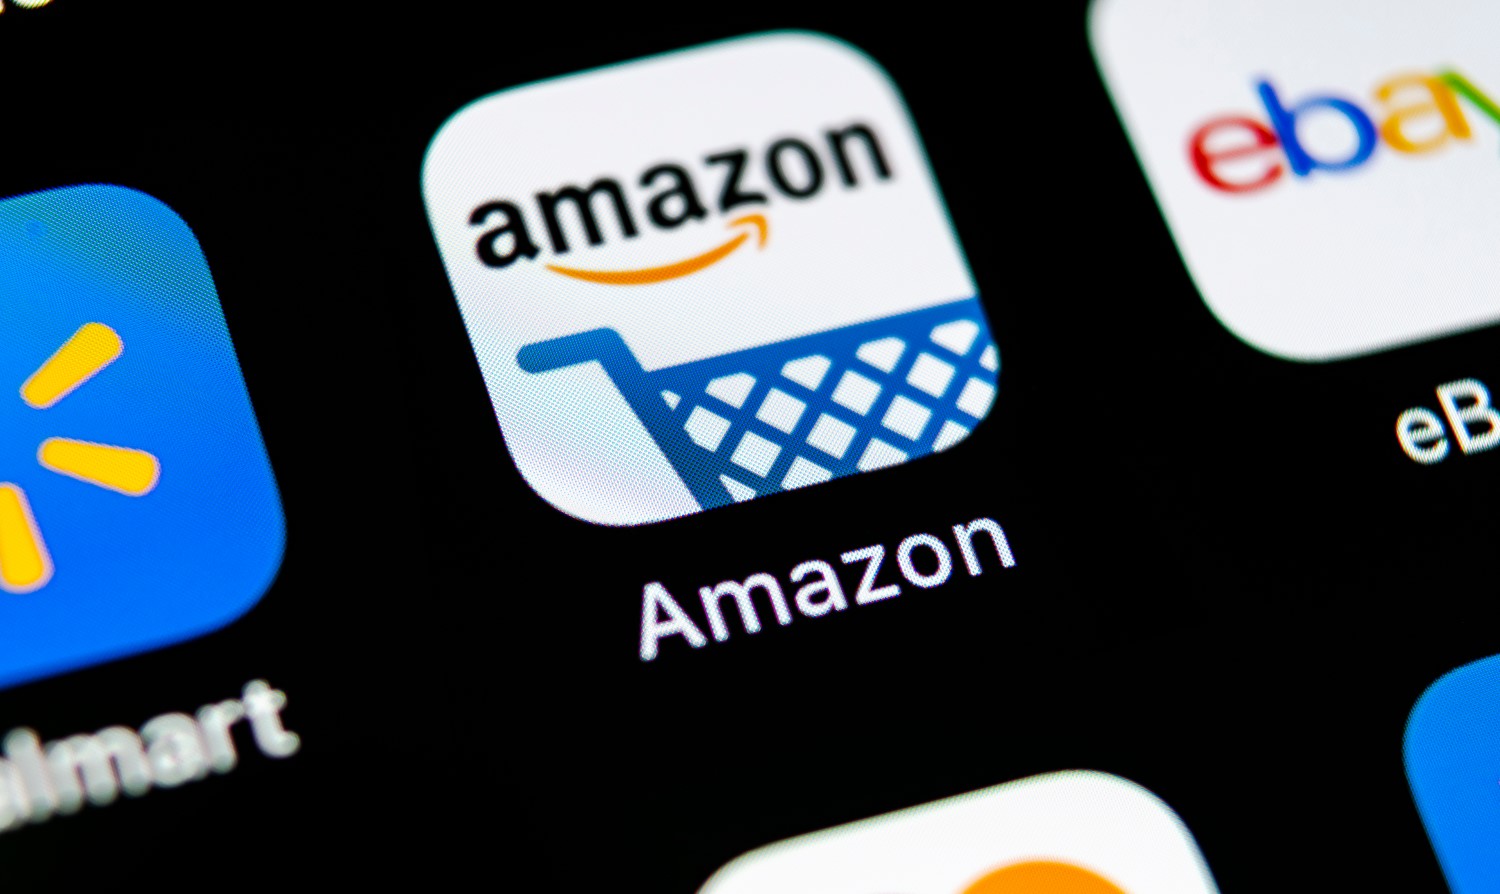 Two Startups Are Partnering To Enable Amazon Purchases With Ethereum